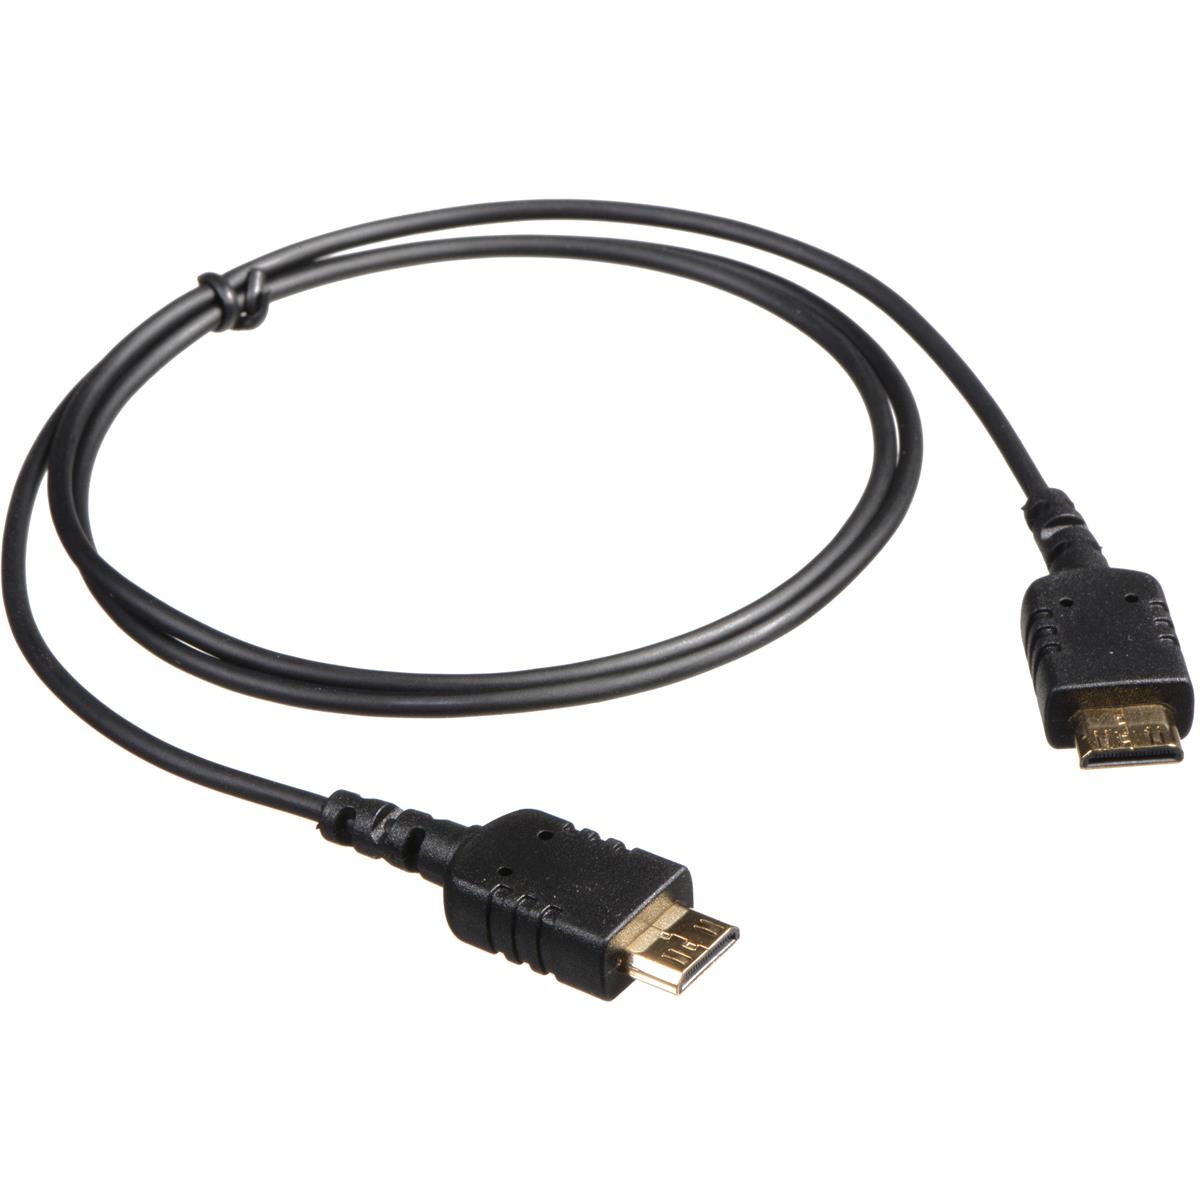 Image of Hyper HyperThin Thinnest and Flexible Mini HDMI to Mini HDMI Cable